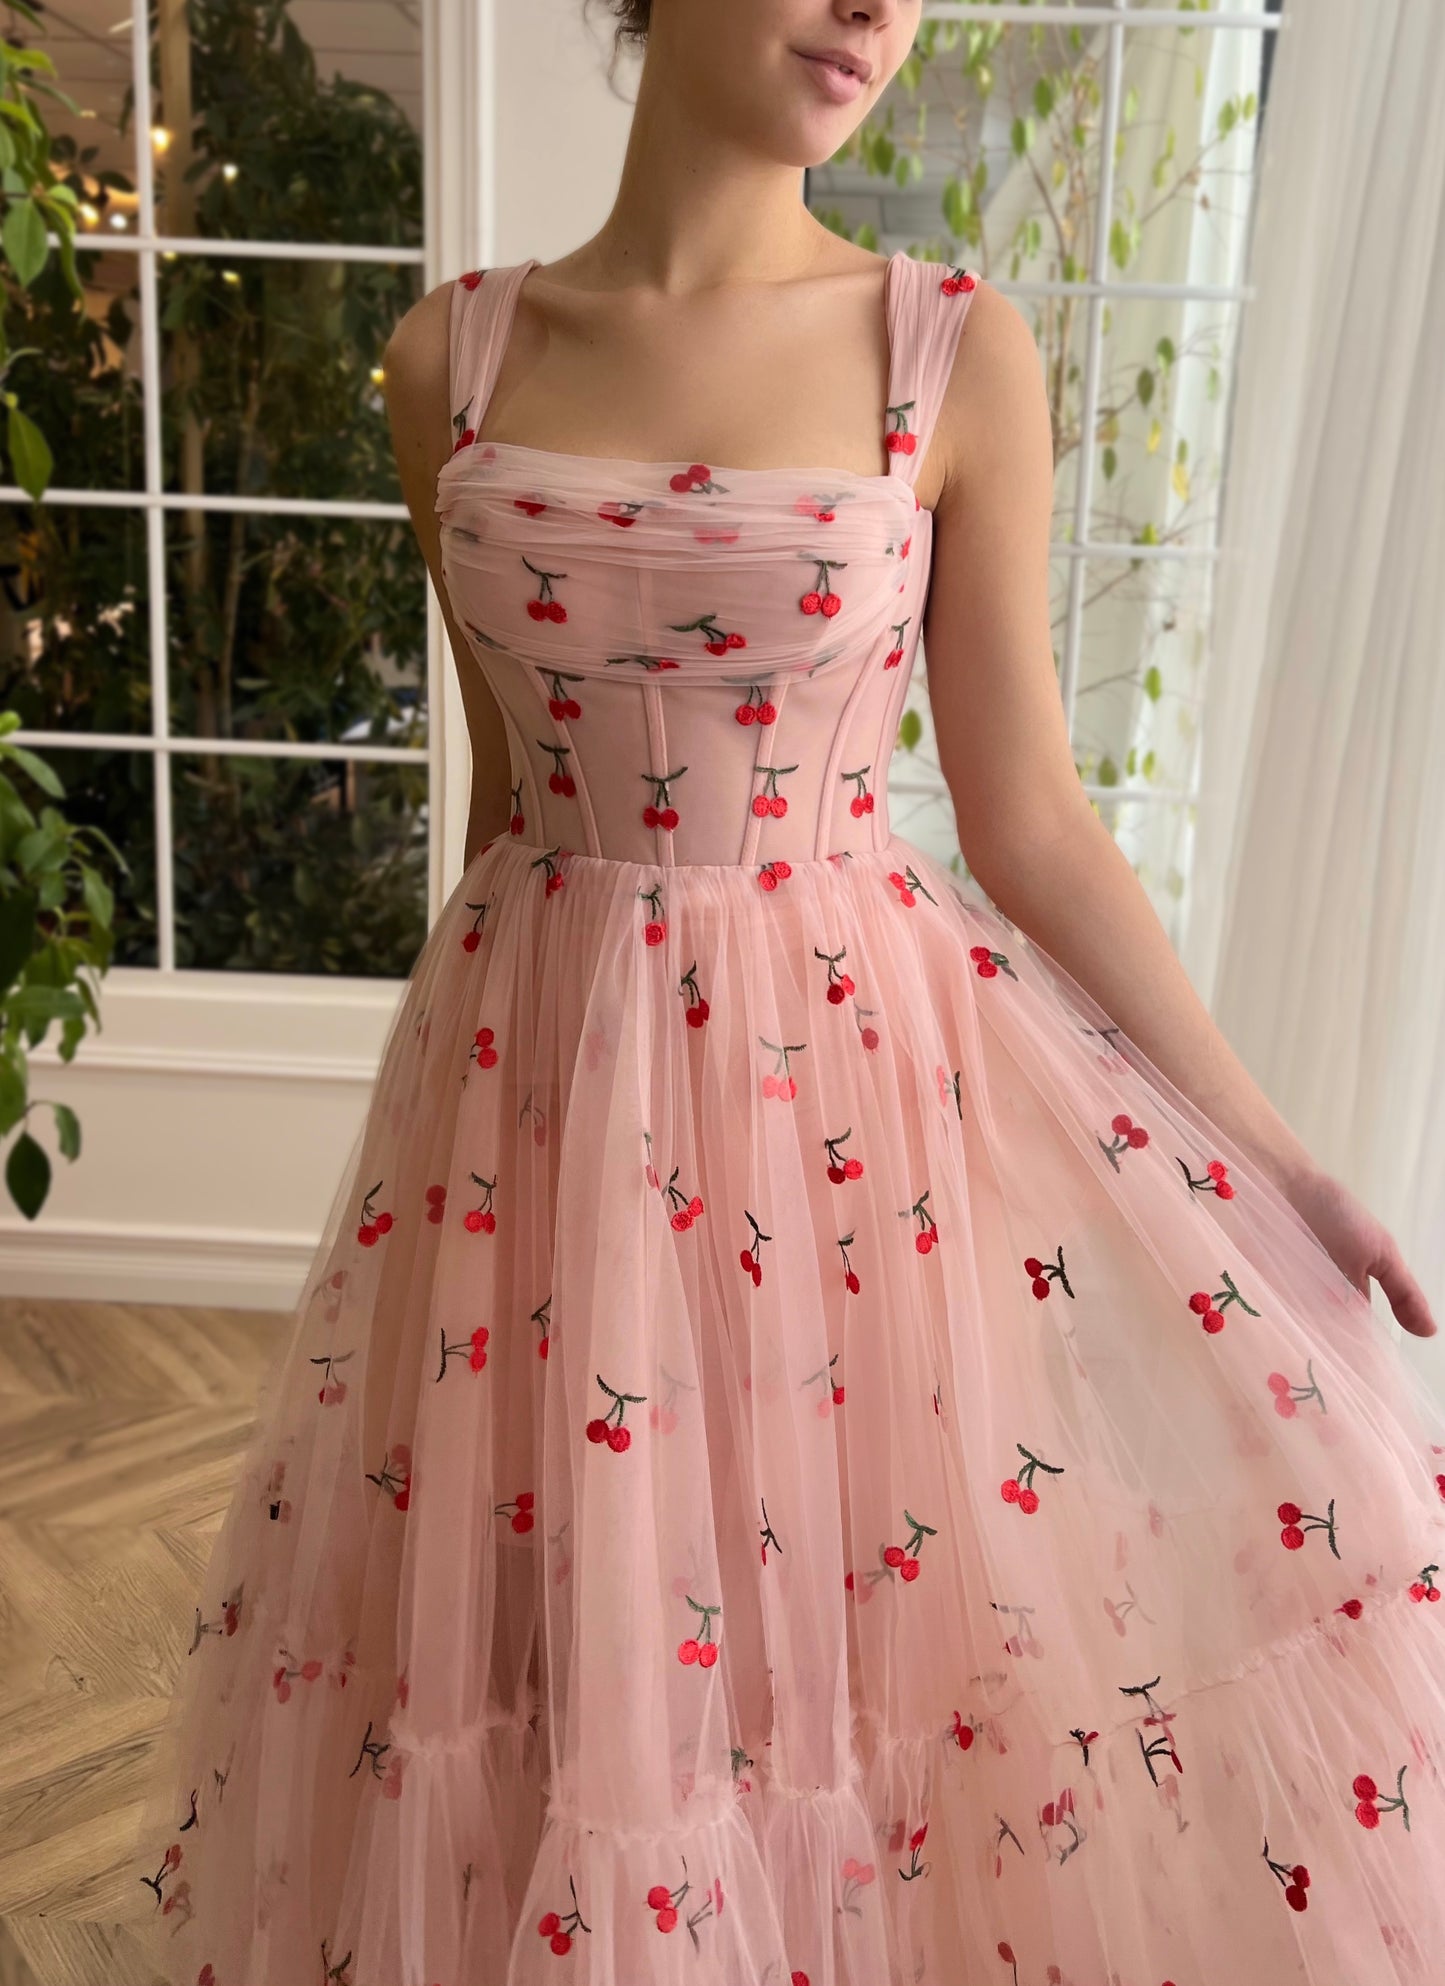 Pink midi dress with printed cherries and straps